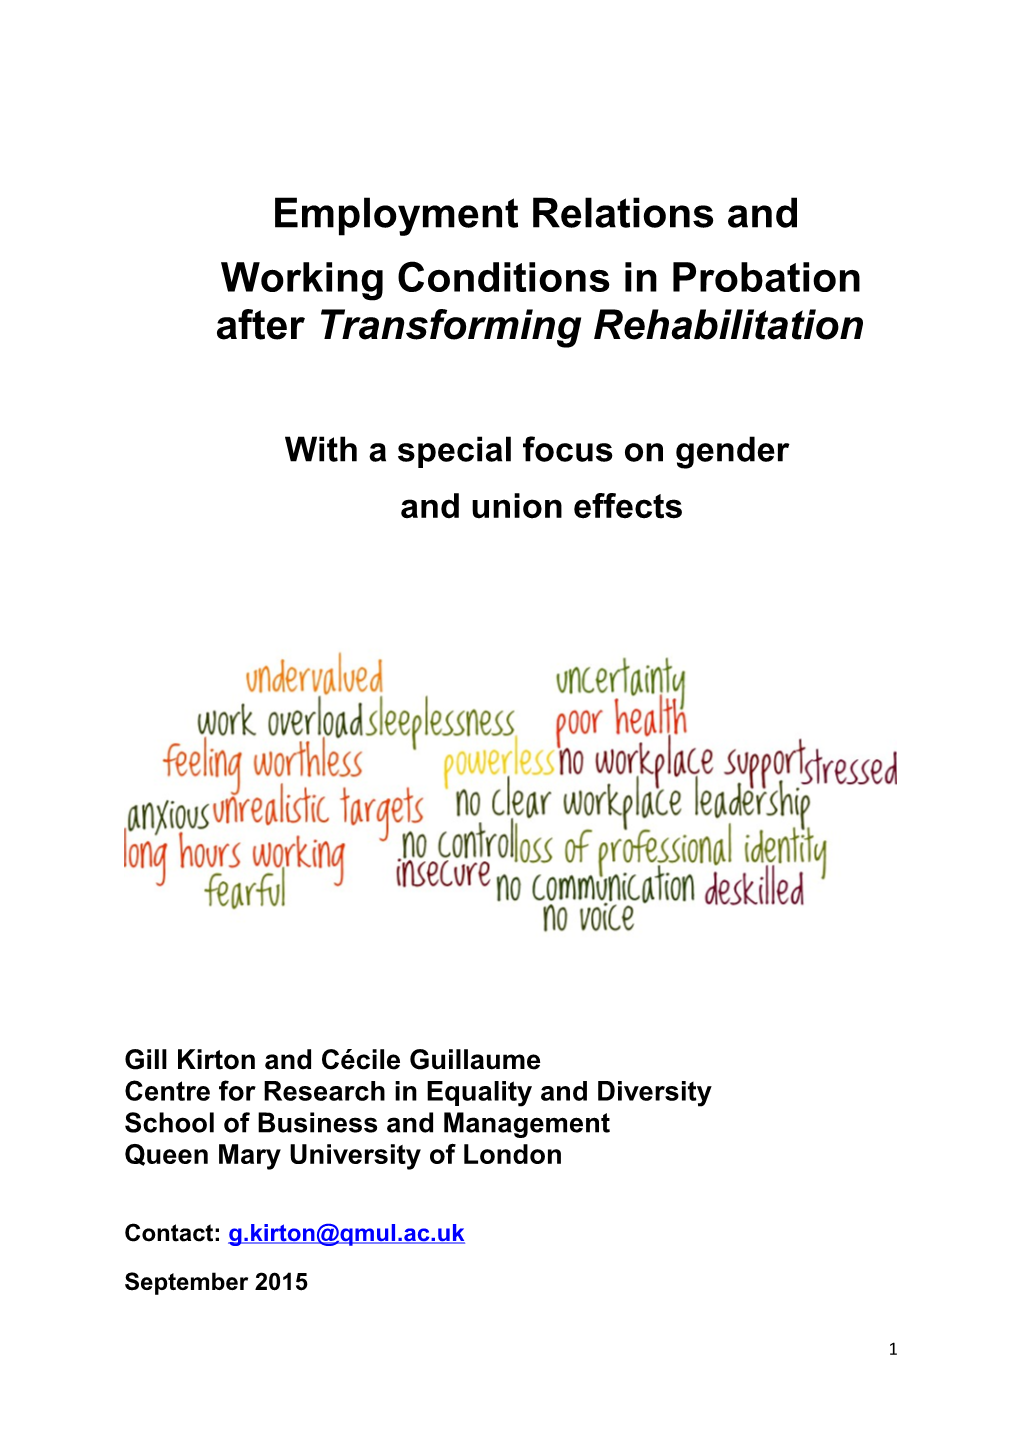 Working Conditions in Probation After Transforming Rehabilitation